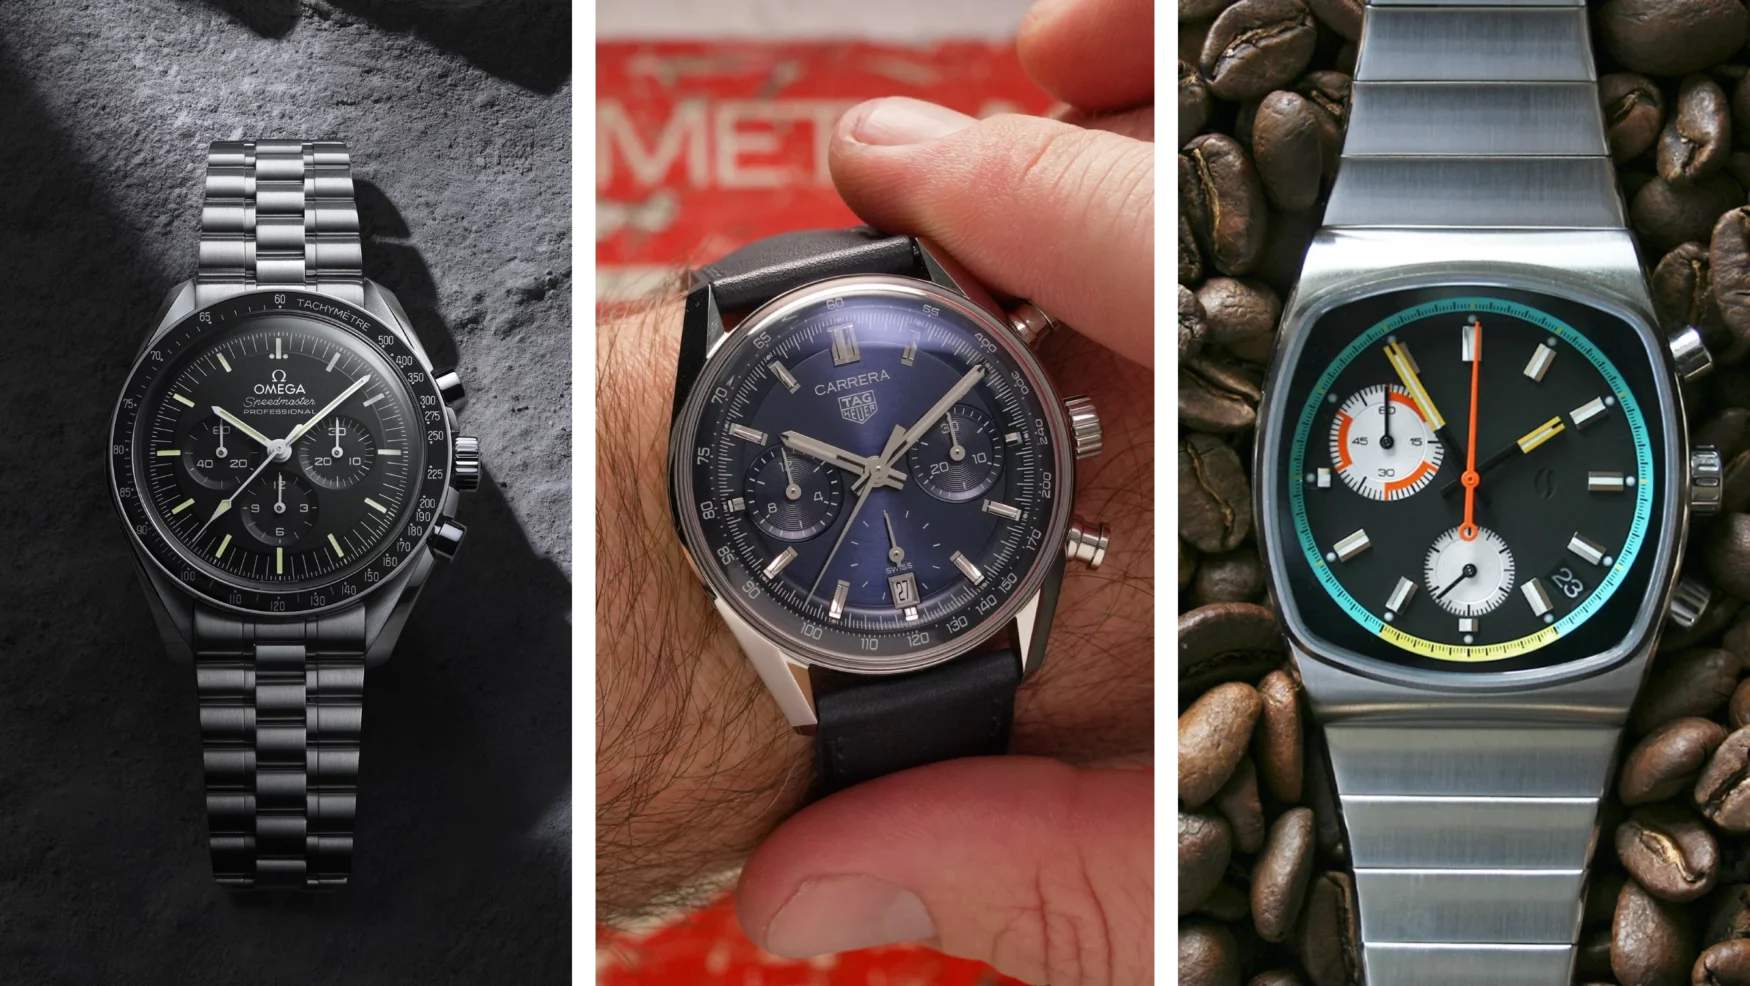 The 12 best chronographs for timing everything from car races to coffee brewing